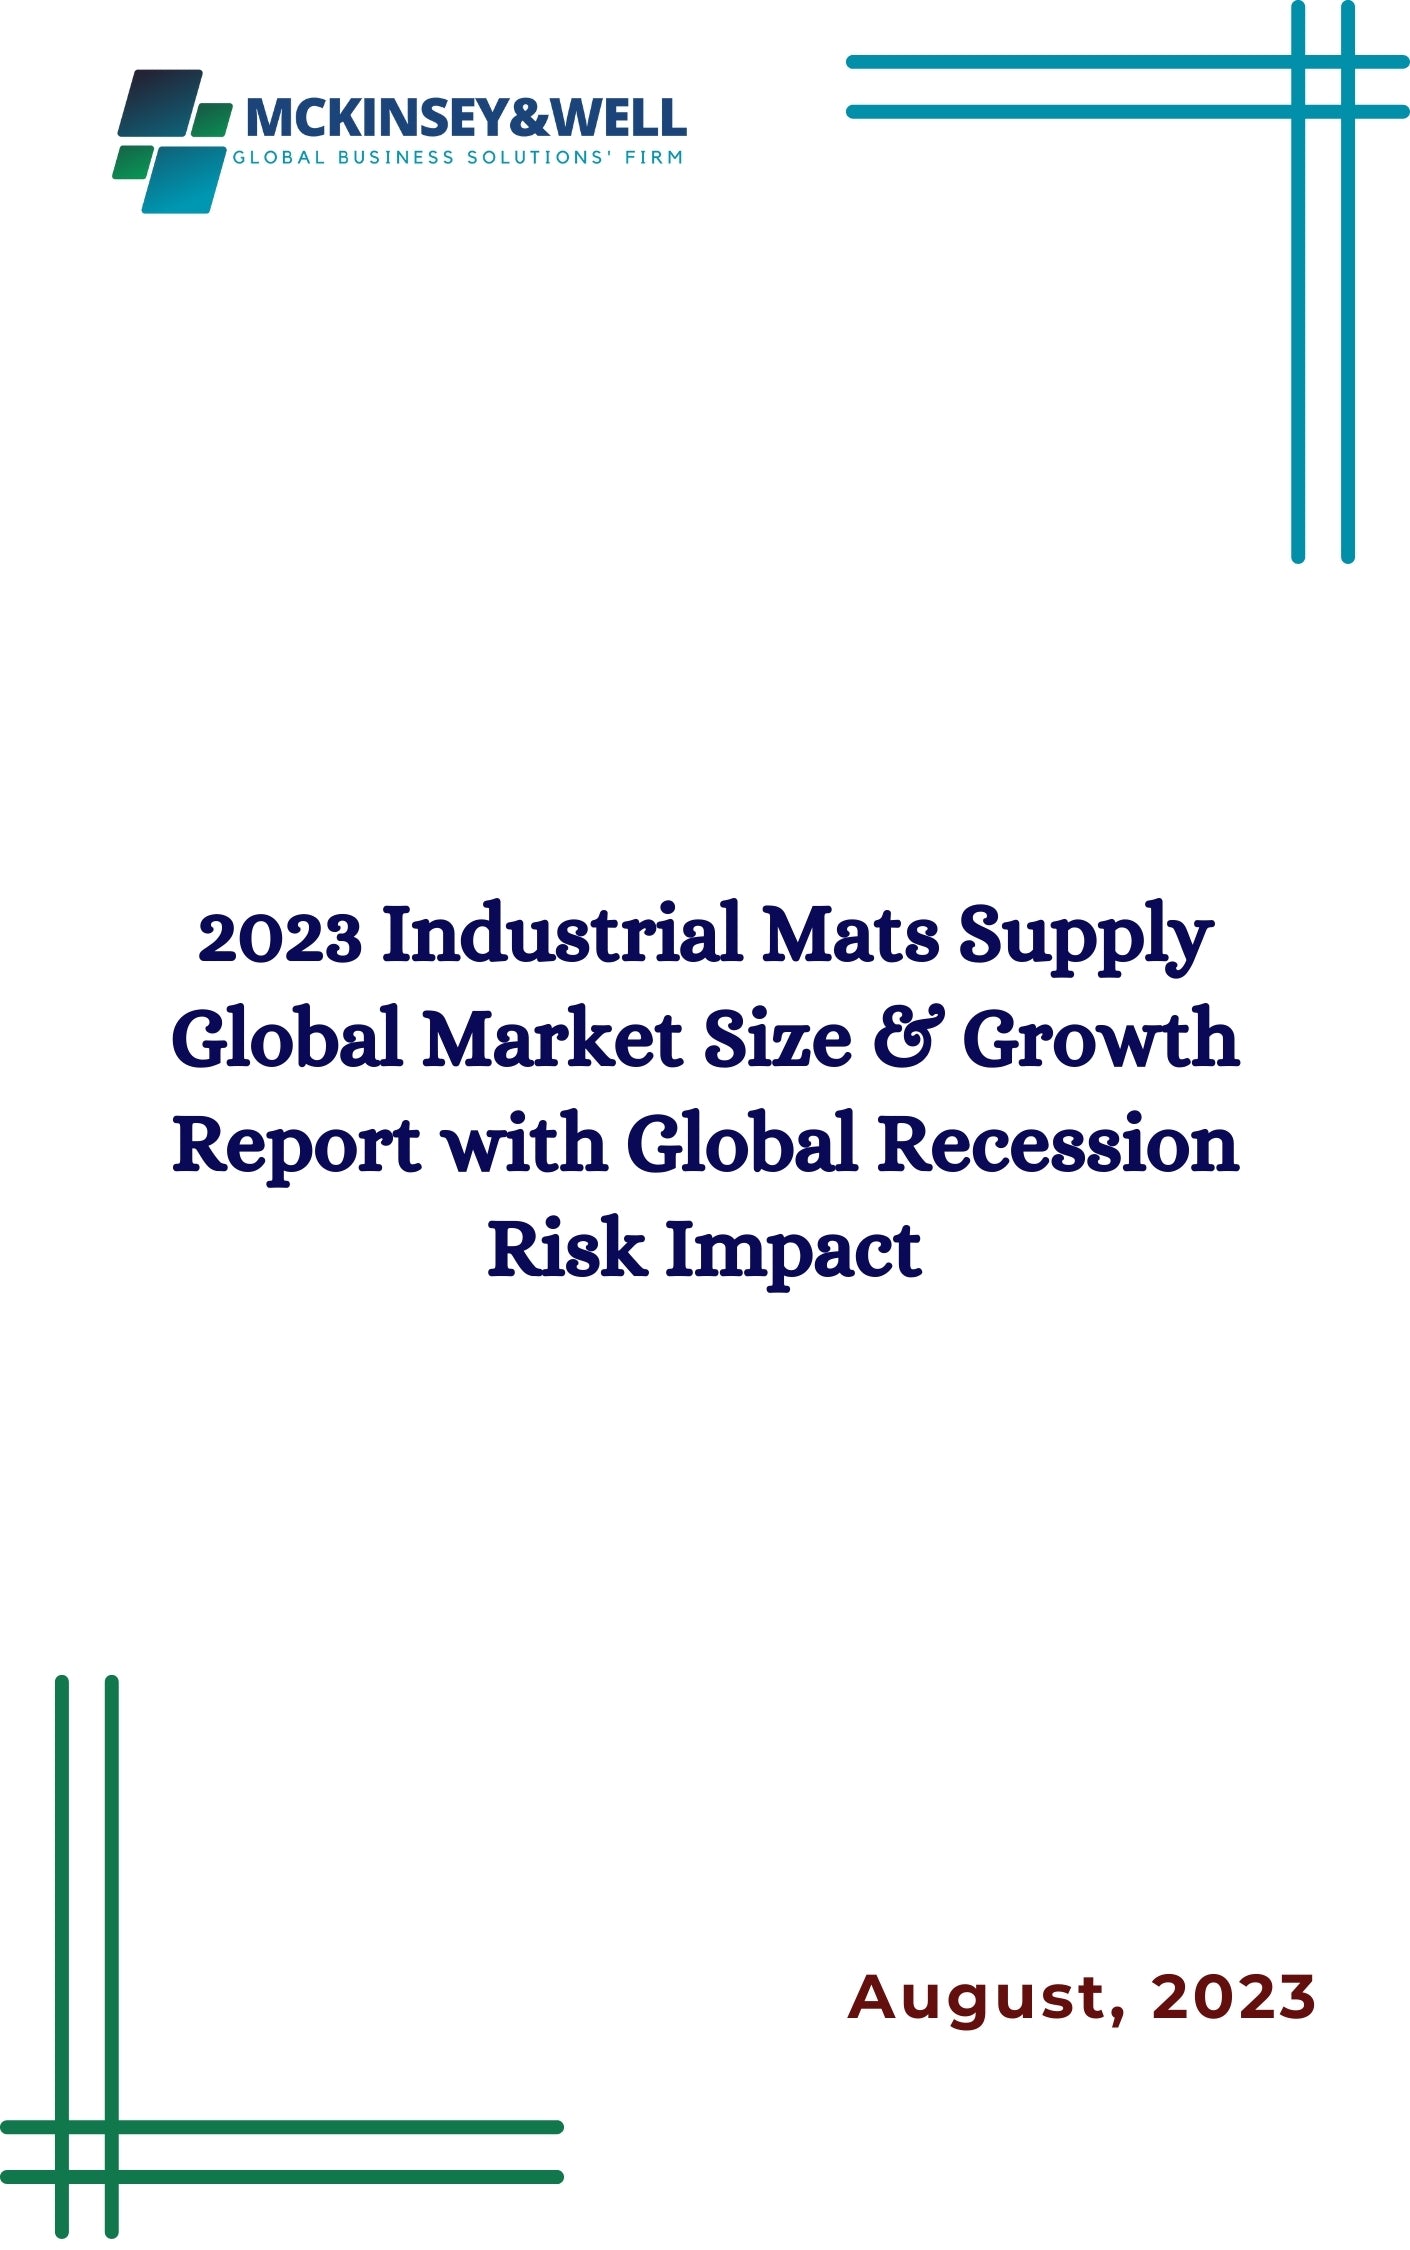 2023 Industrial Mats Supply Global Market Size & Growth Report with Global Recession Risk Impact